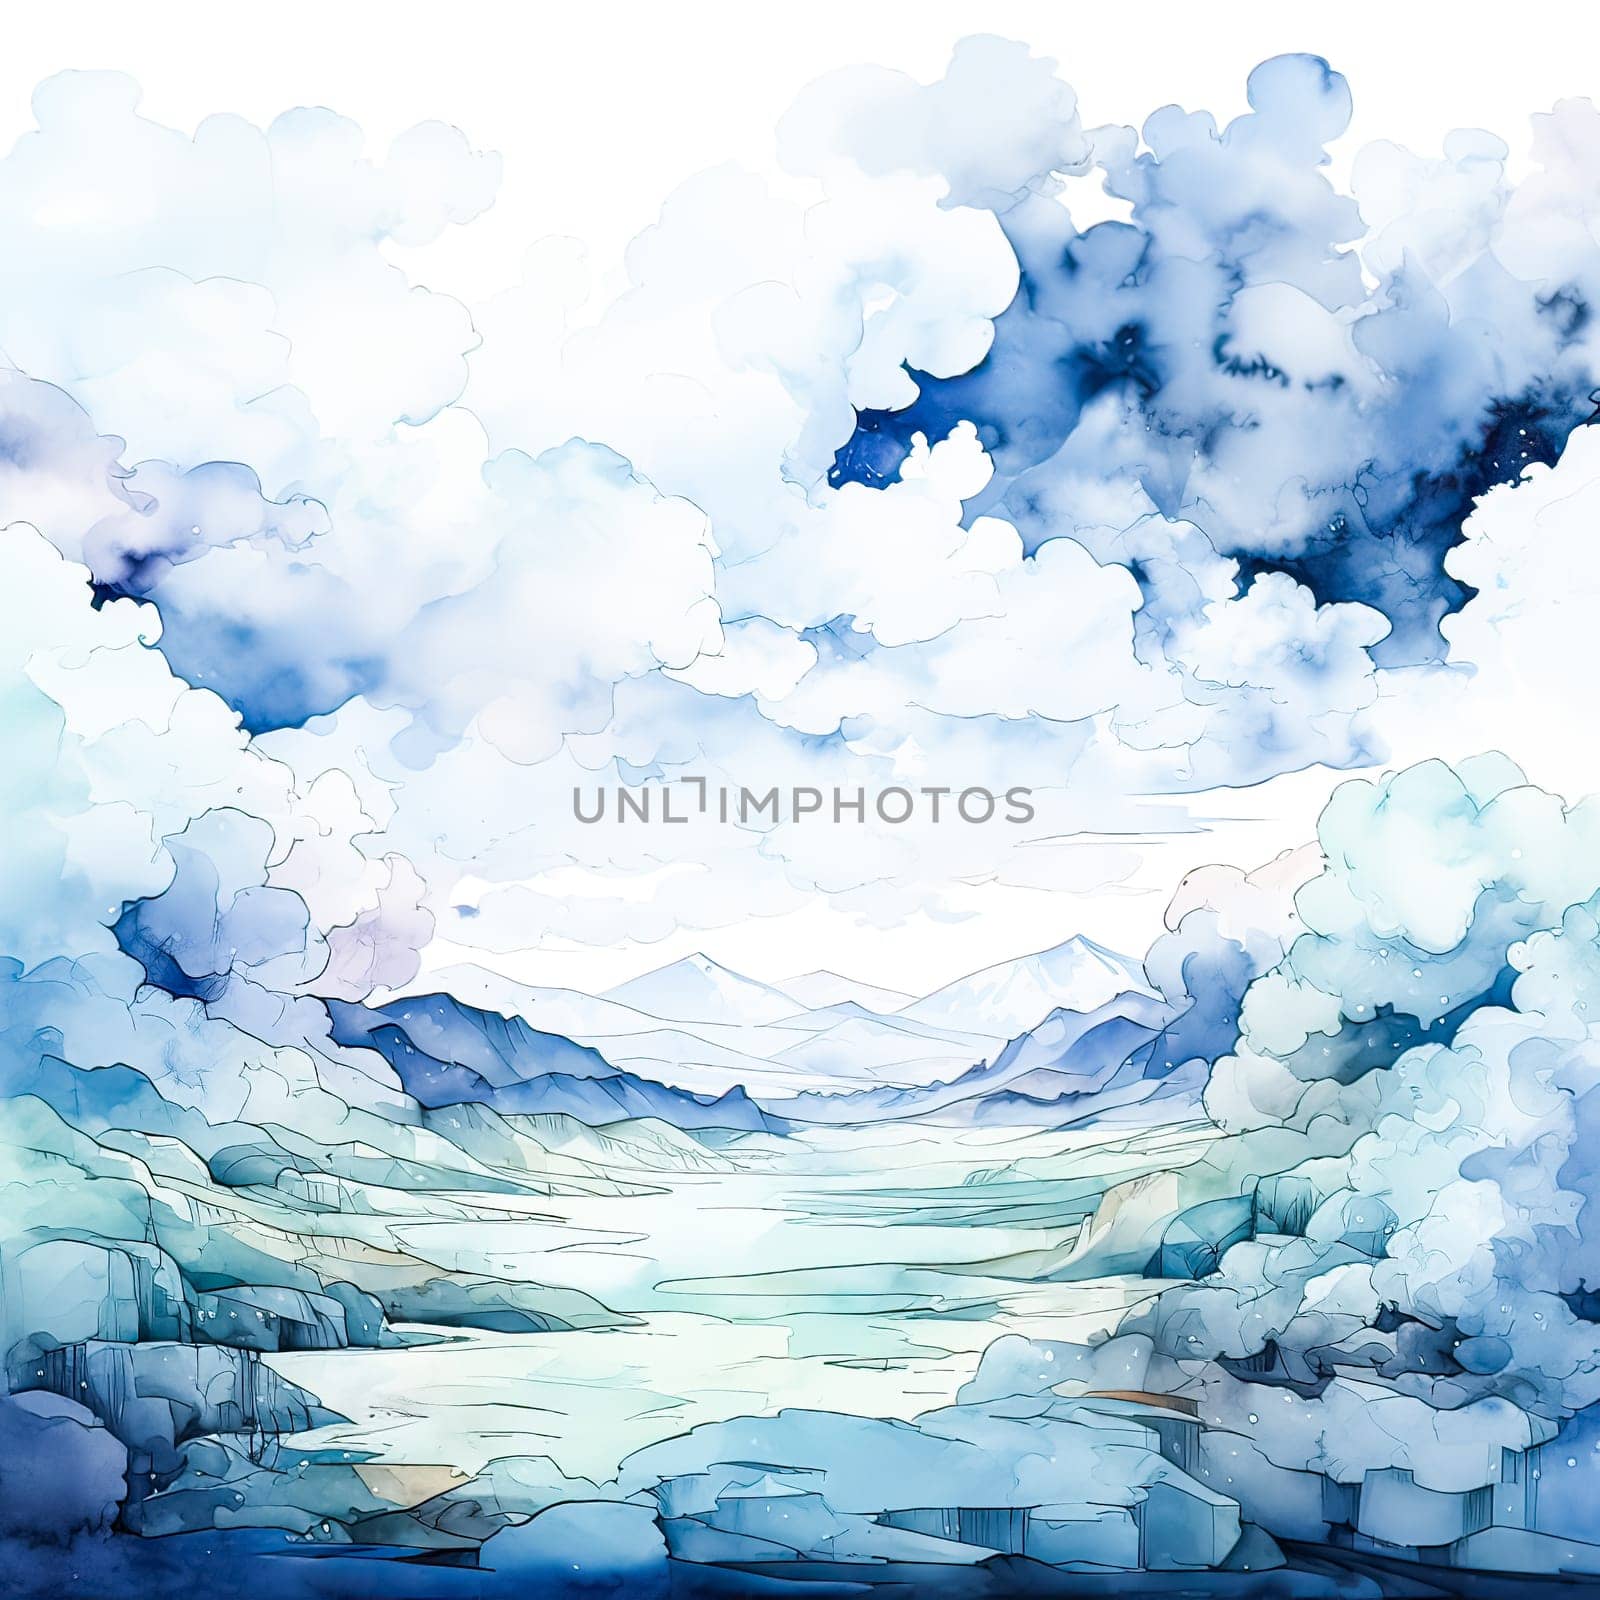 Serene watercolor landscape in soothing blues a tranquil masterpiece capturing the essence of nature's calm and serene beauty.